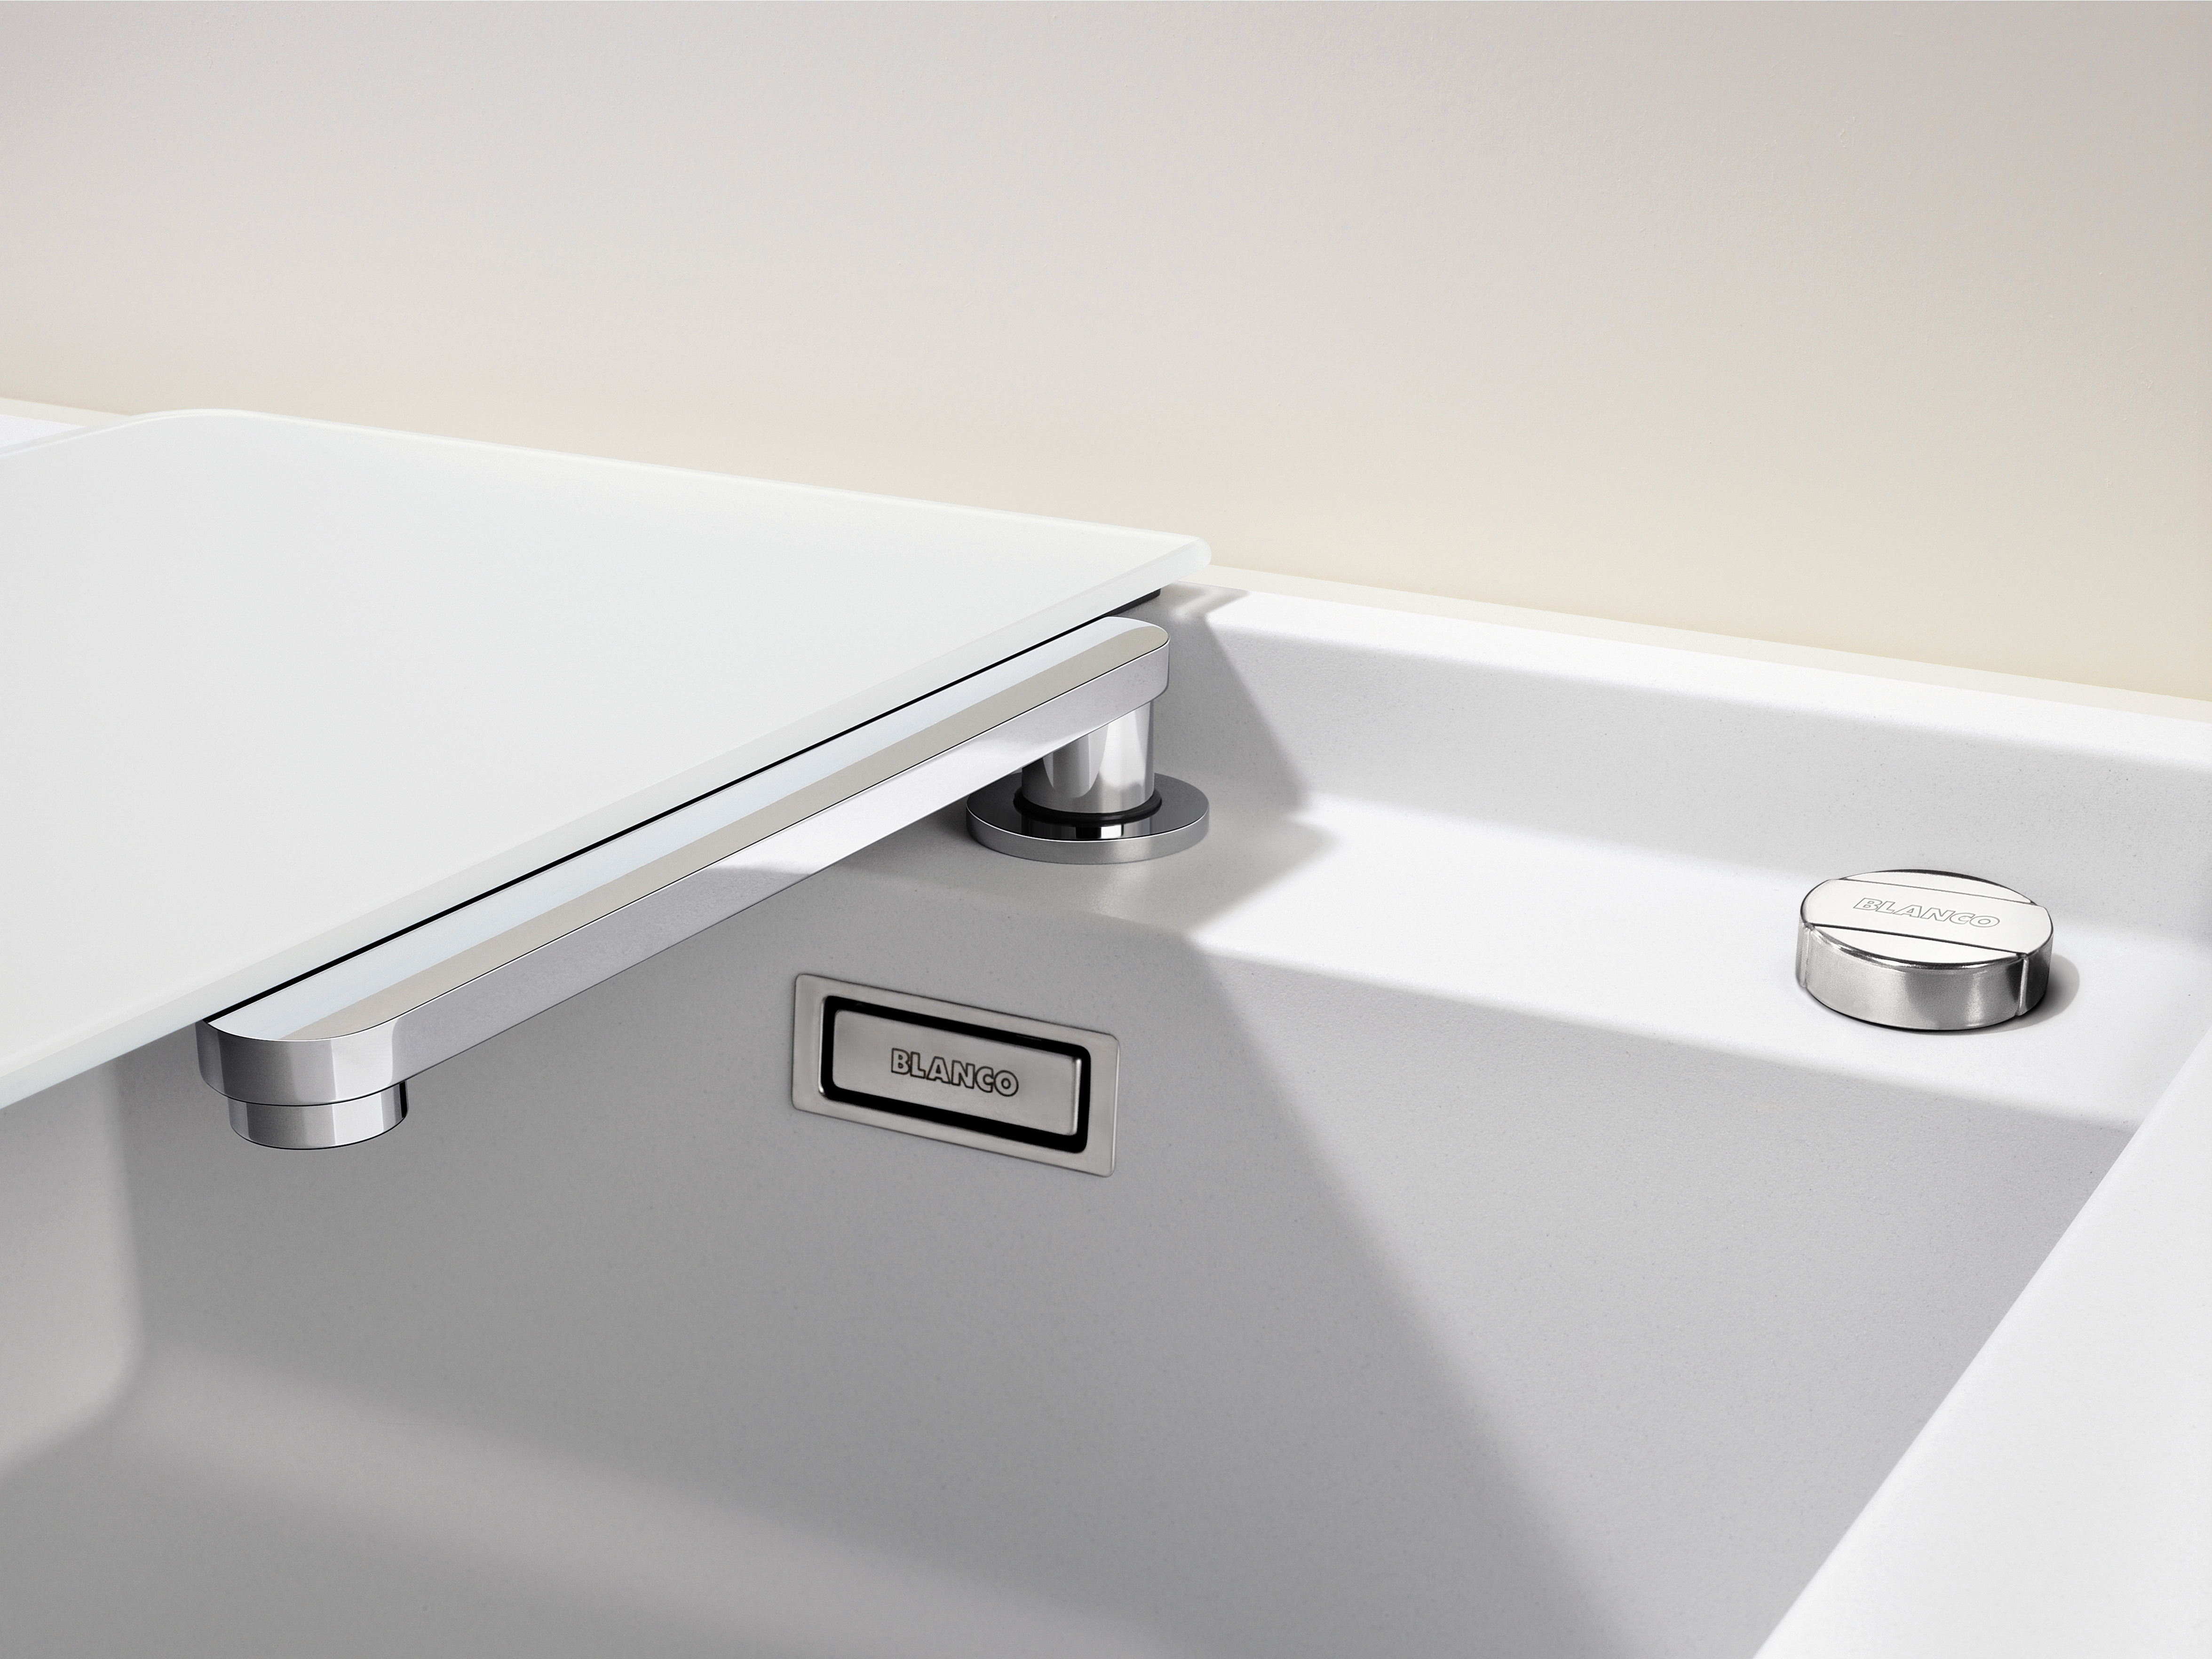 The ALAROS in white Silgranit Ideal for bright kitchens and hidden retractable mixer taps